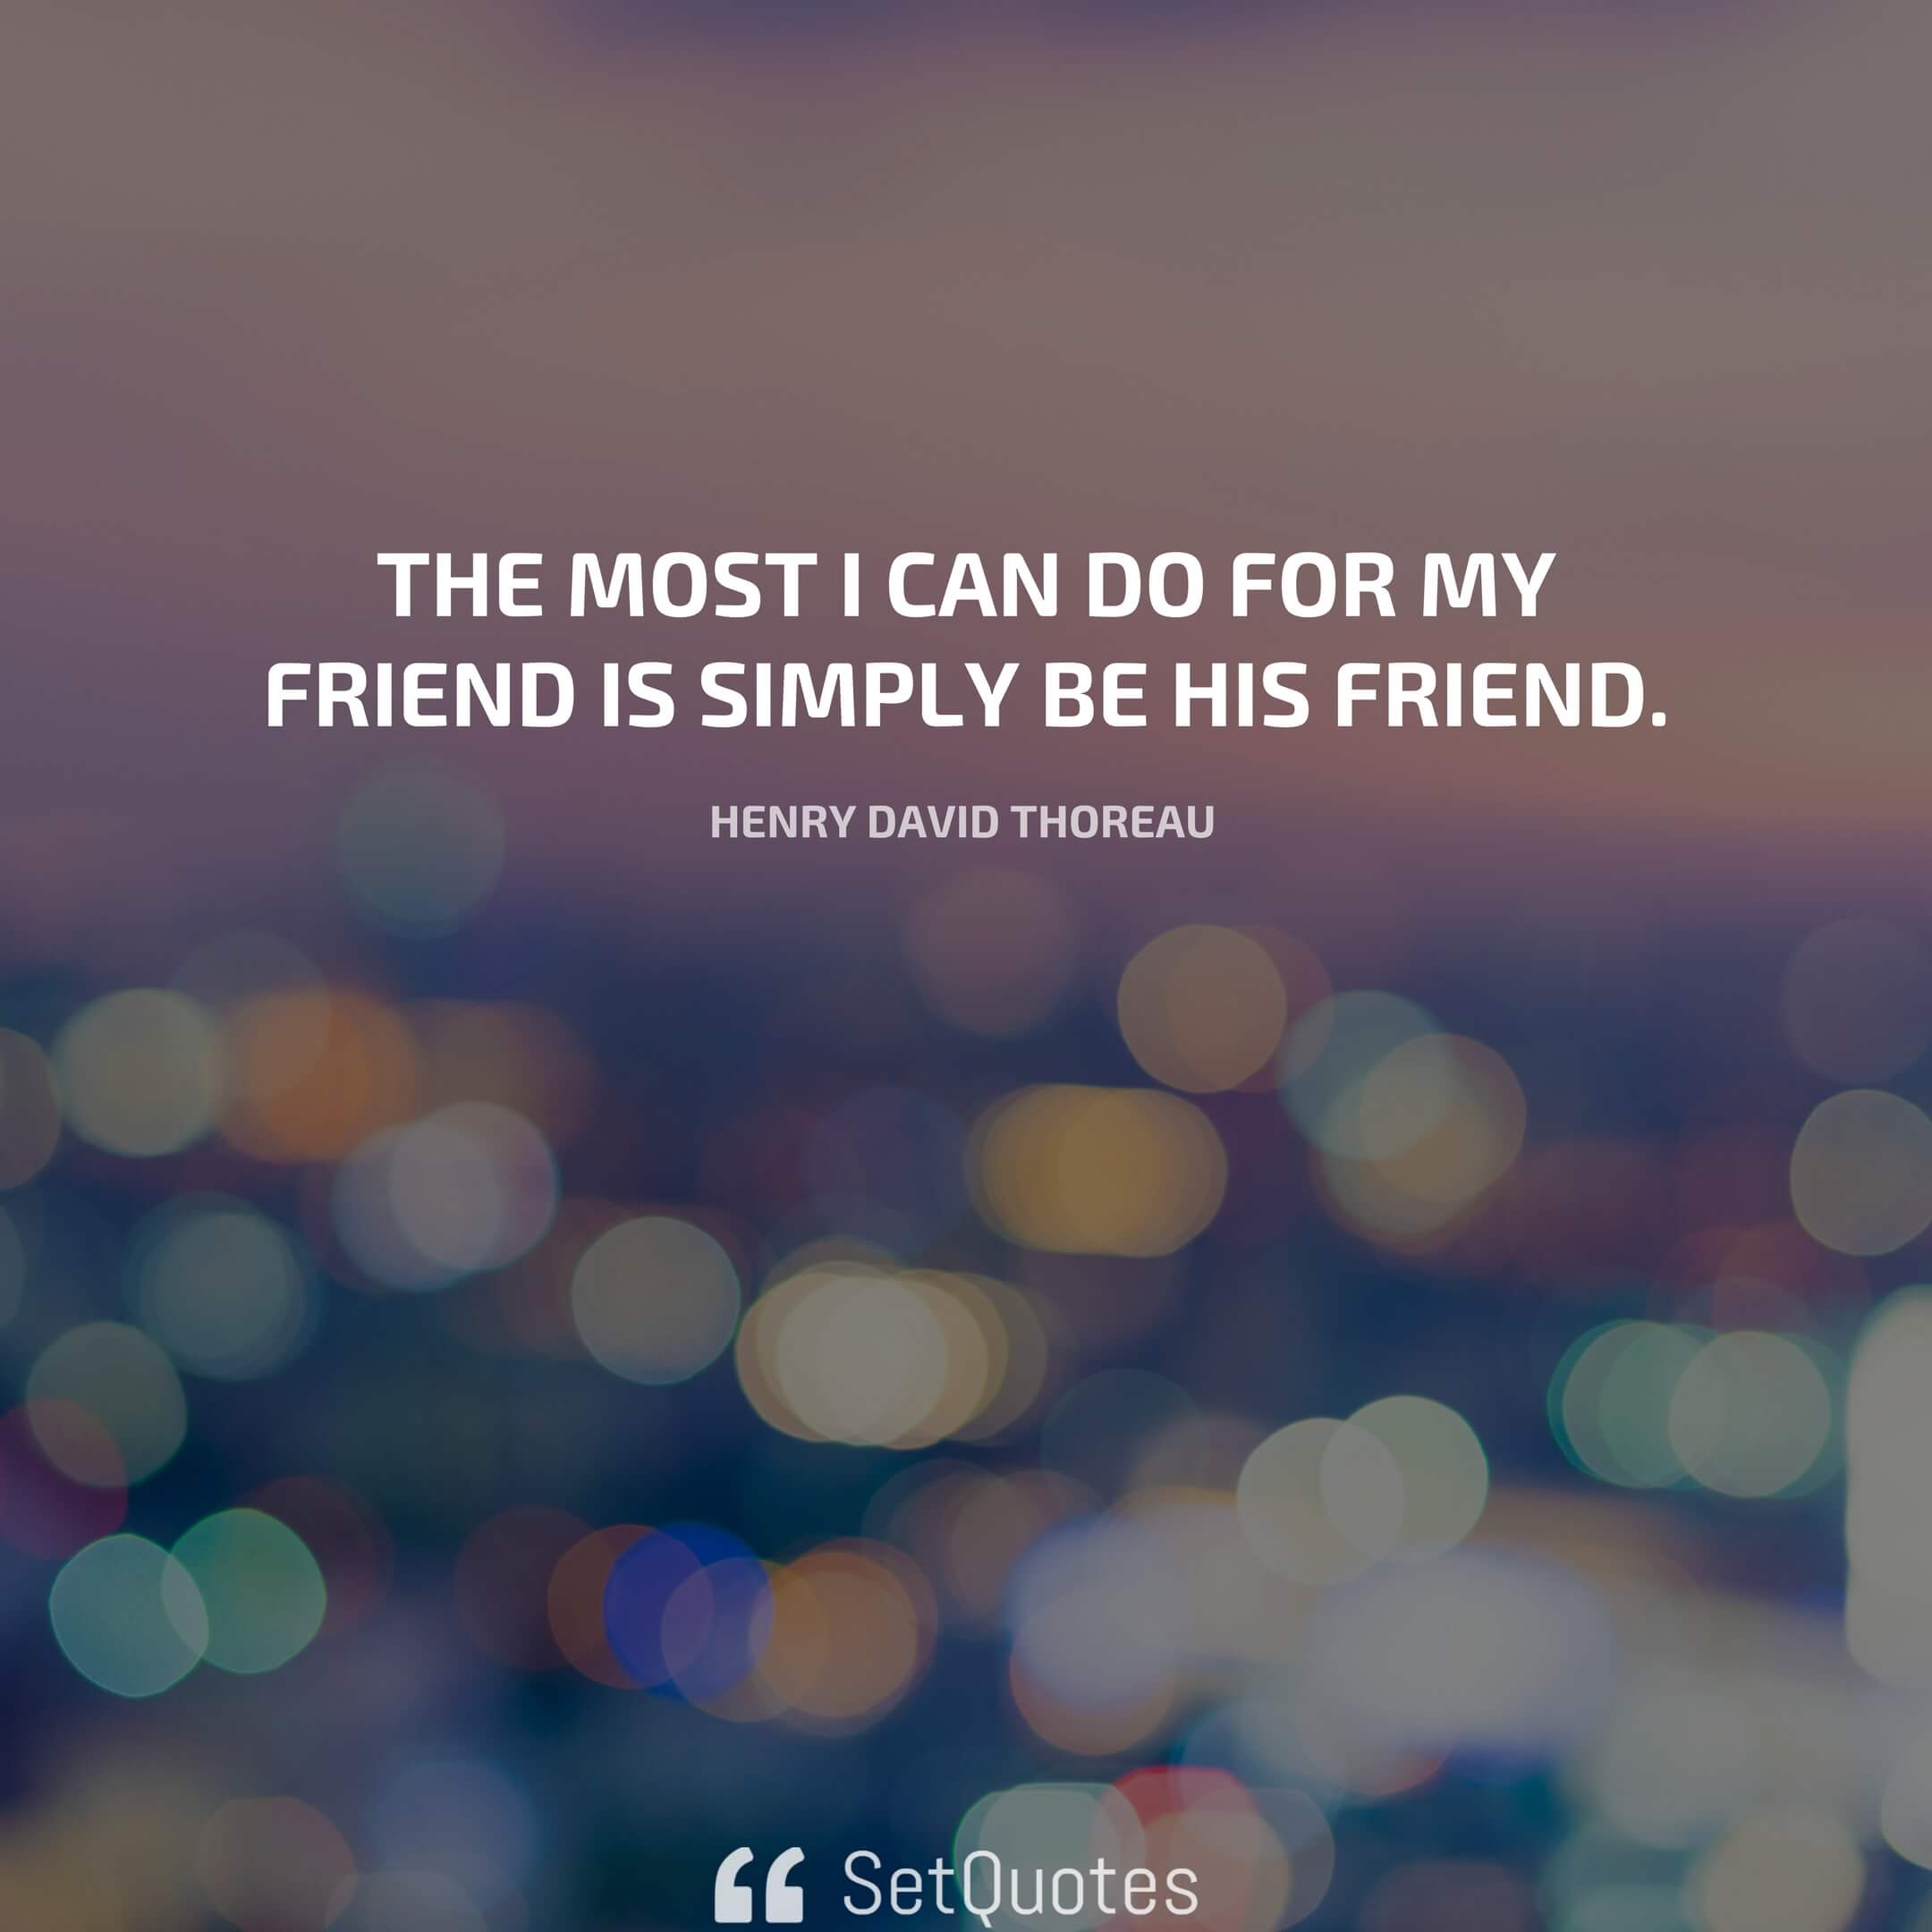 The most I can do for my friend is simply be his friend. - Henry David Thoreau